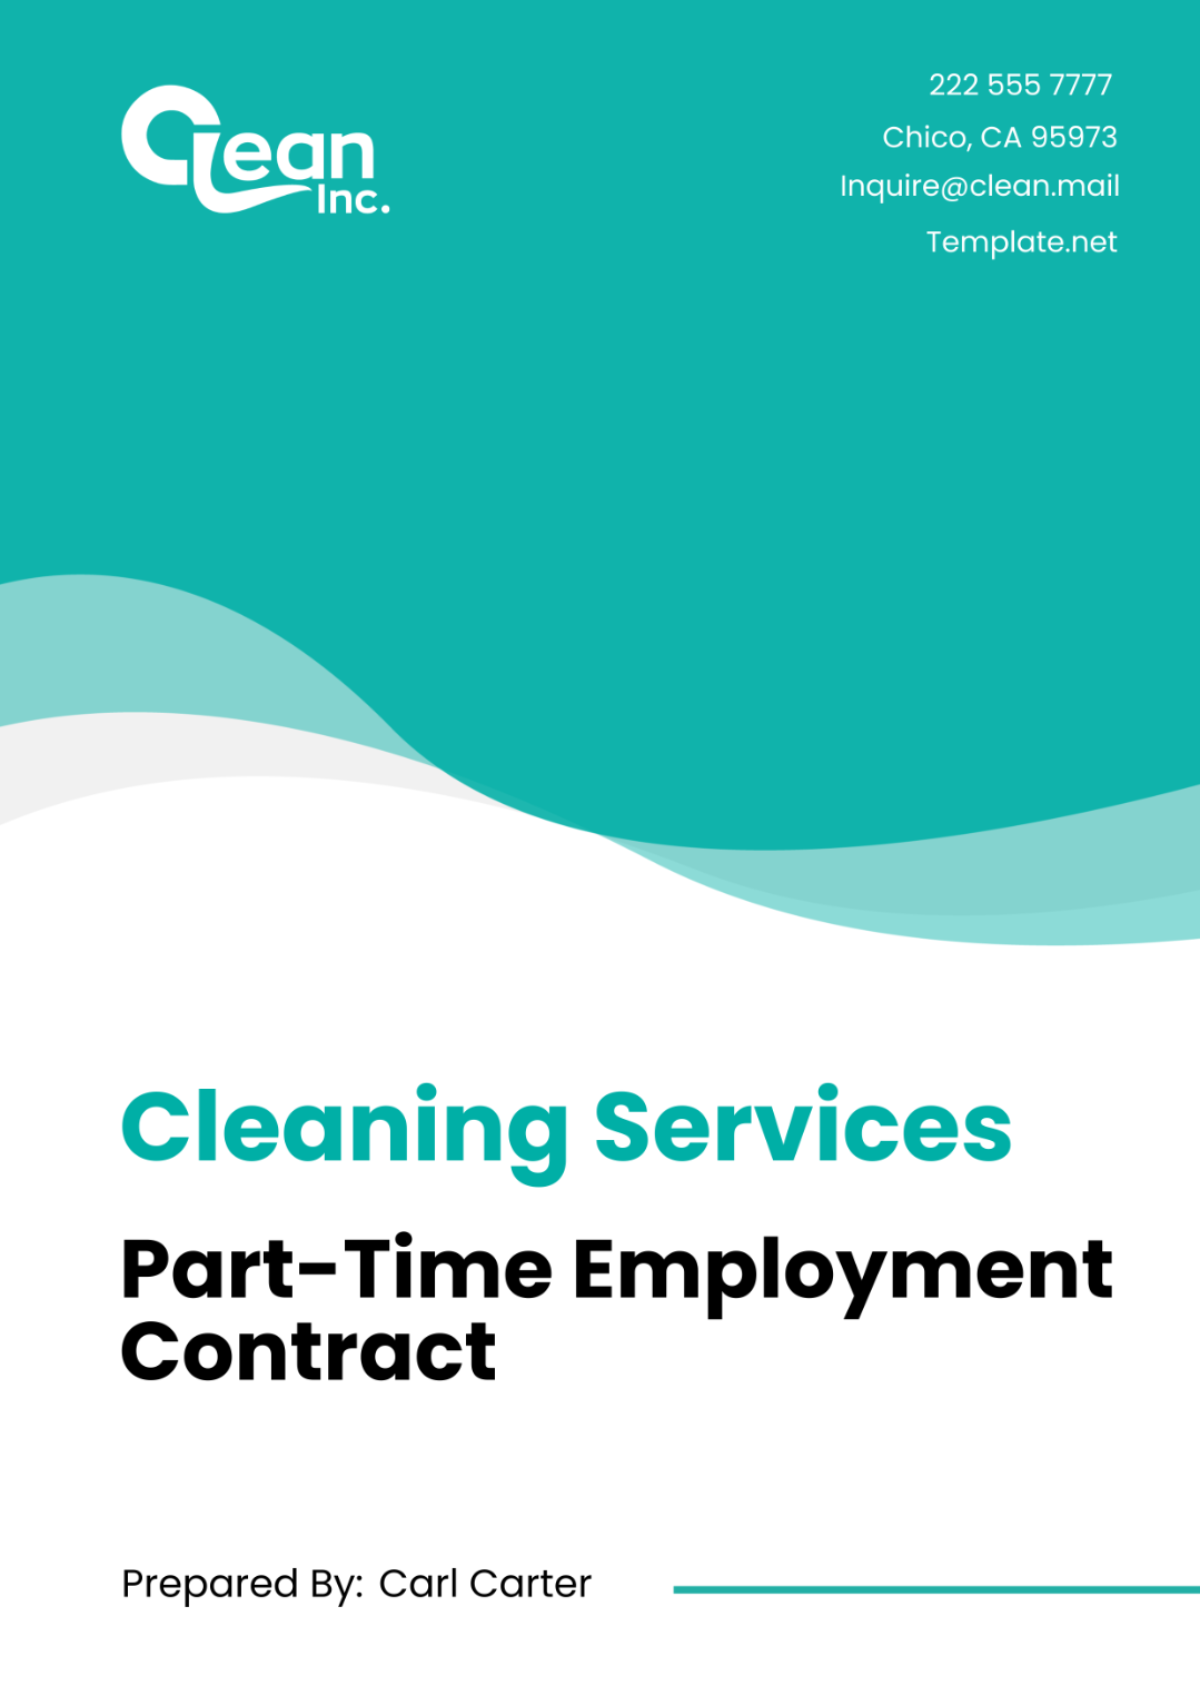 Cleaning Services Part-Time Employment Contract Template